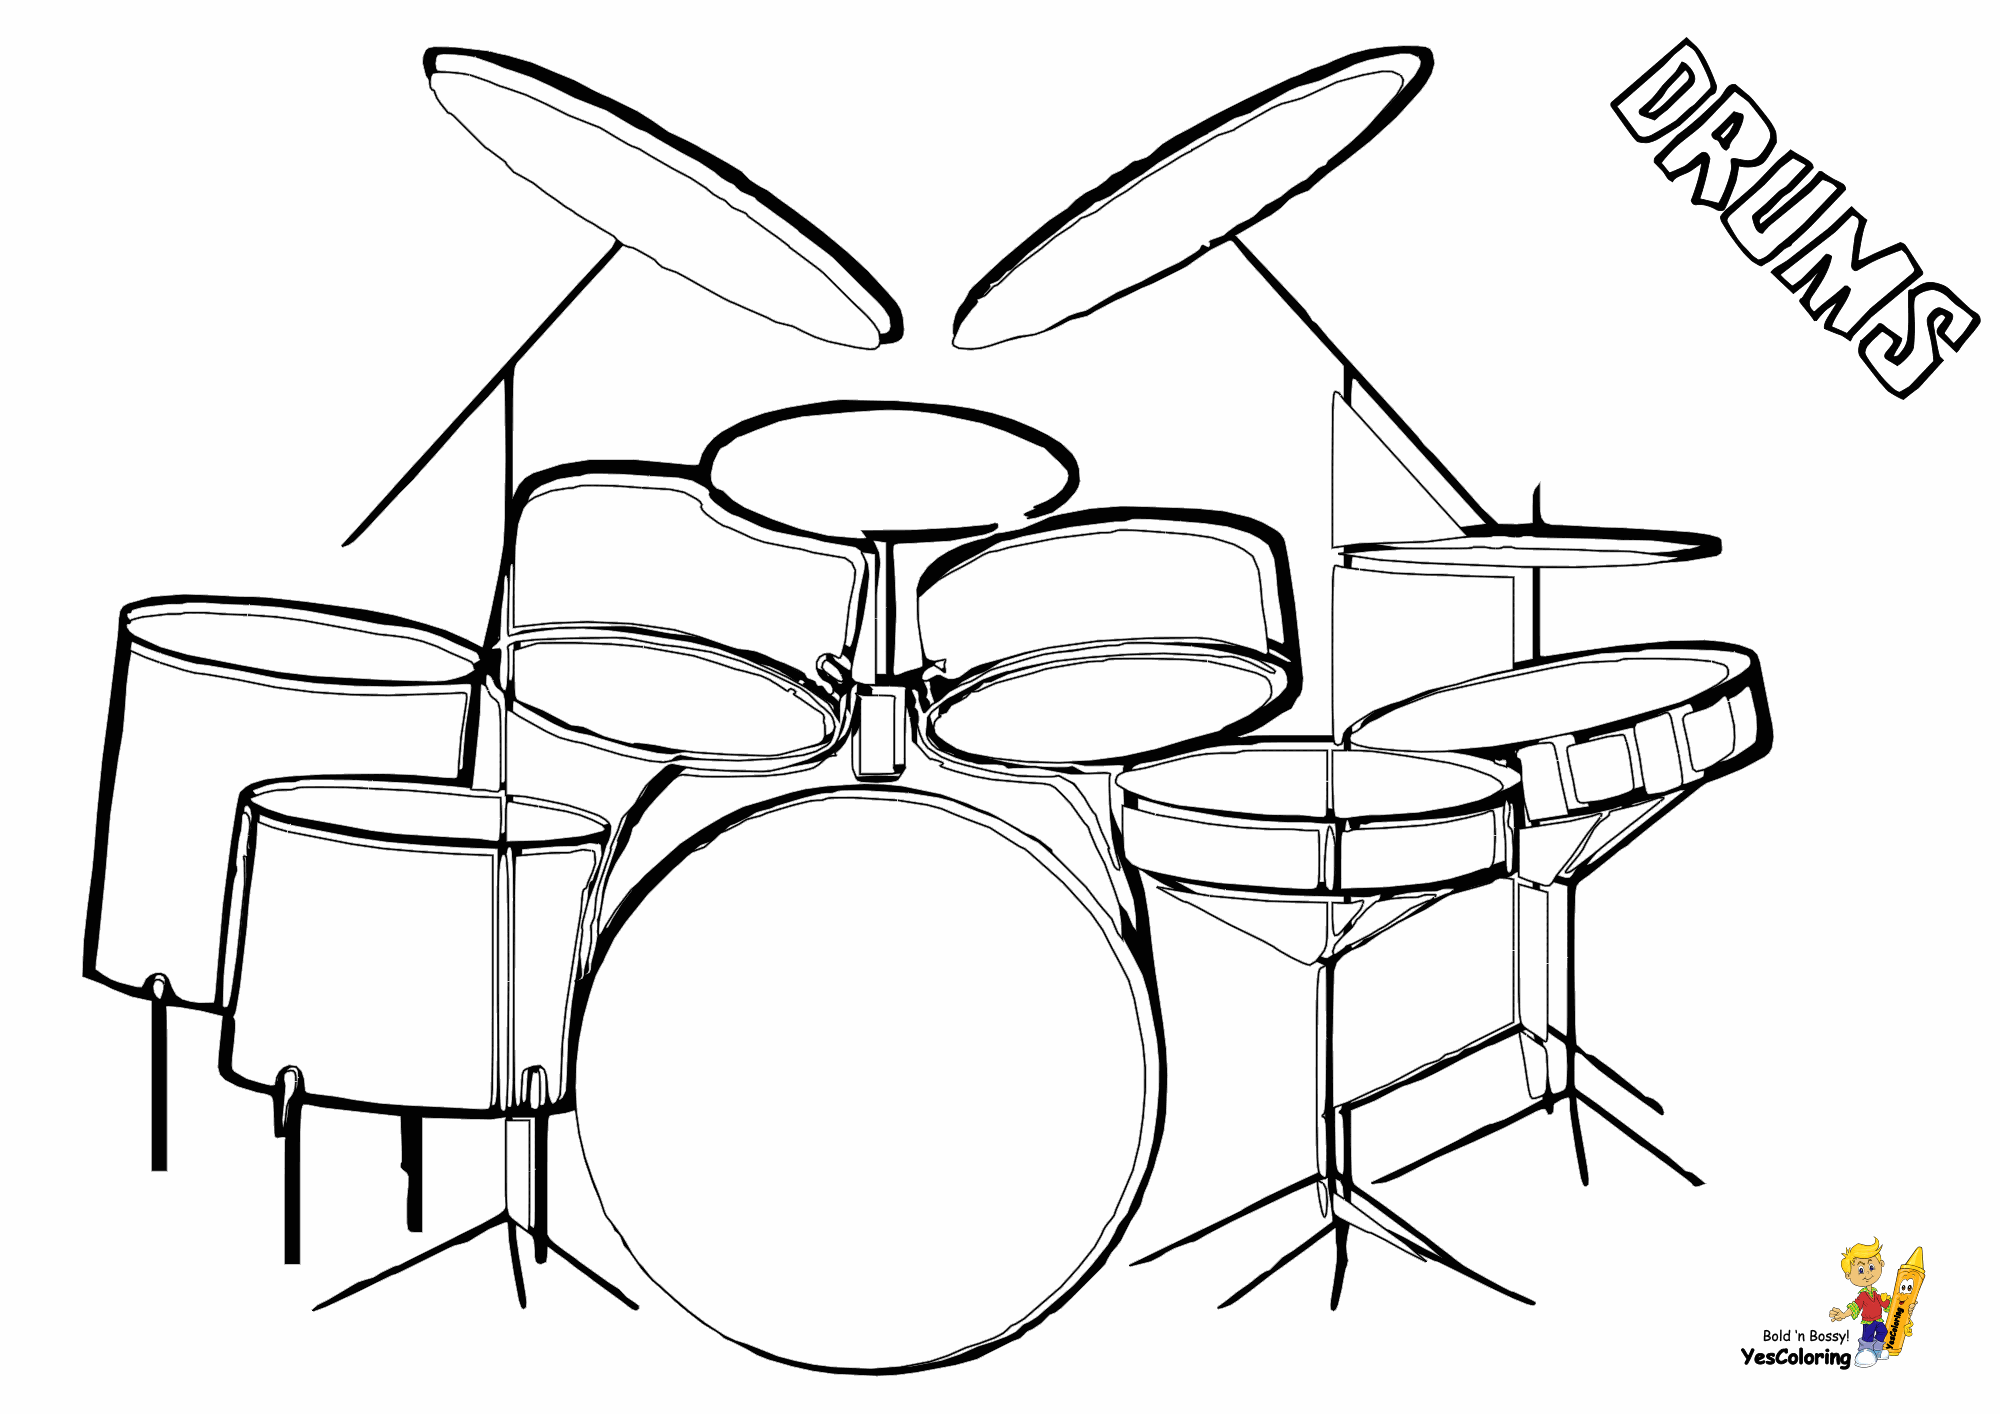 How To Draw Drums For Kids, Step by Step, Drawing Guide, by Dawn - DragoArt